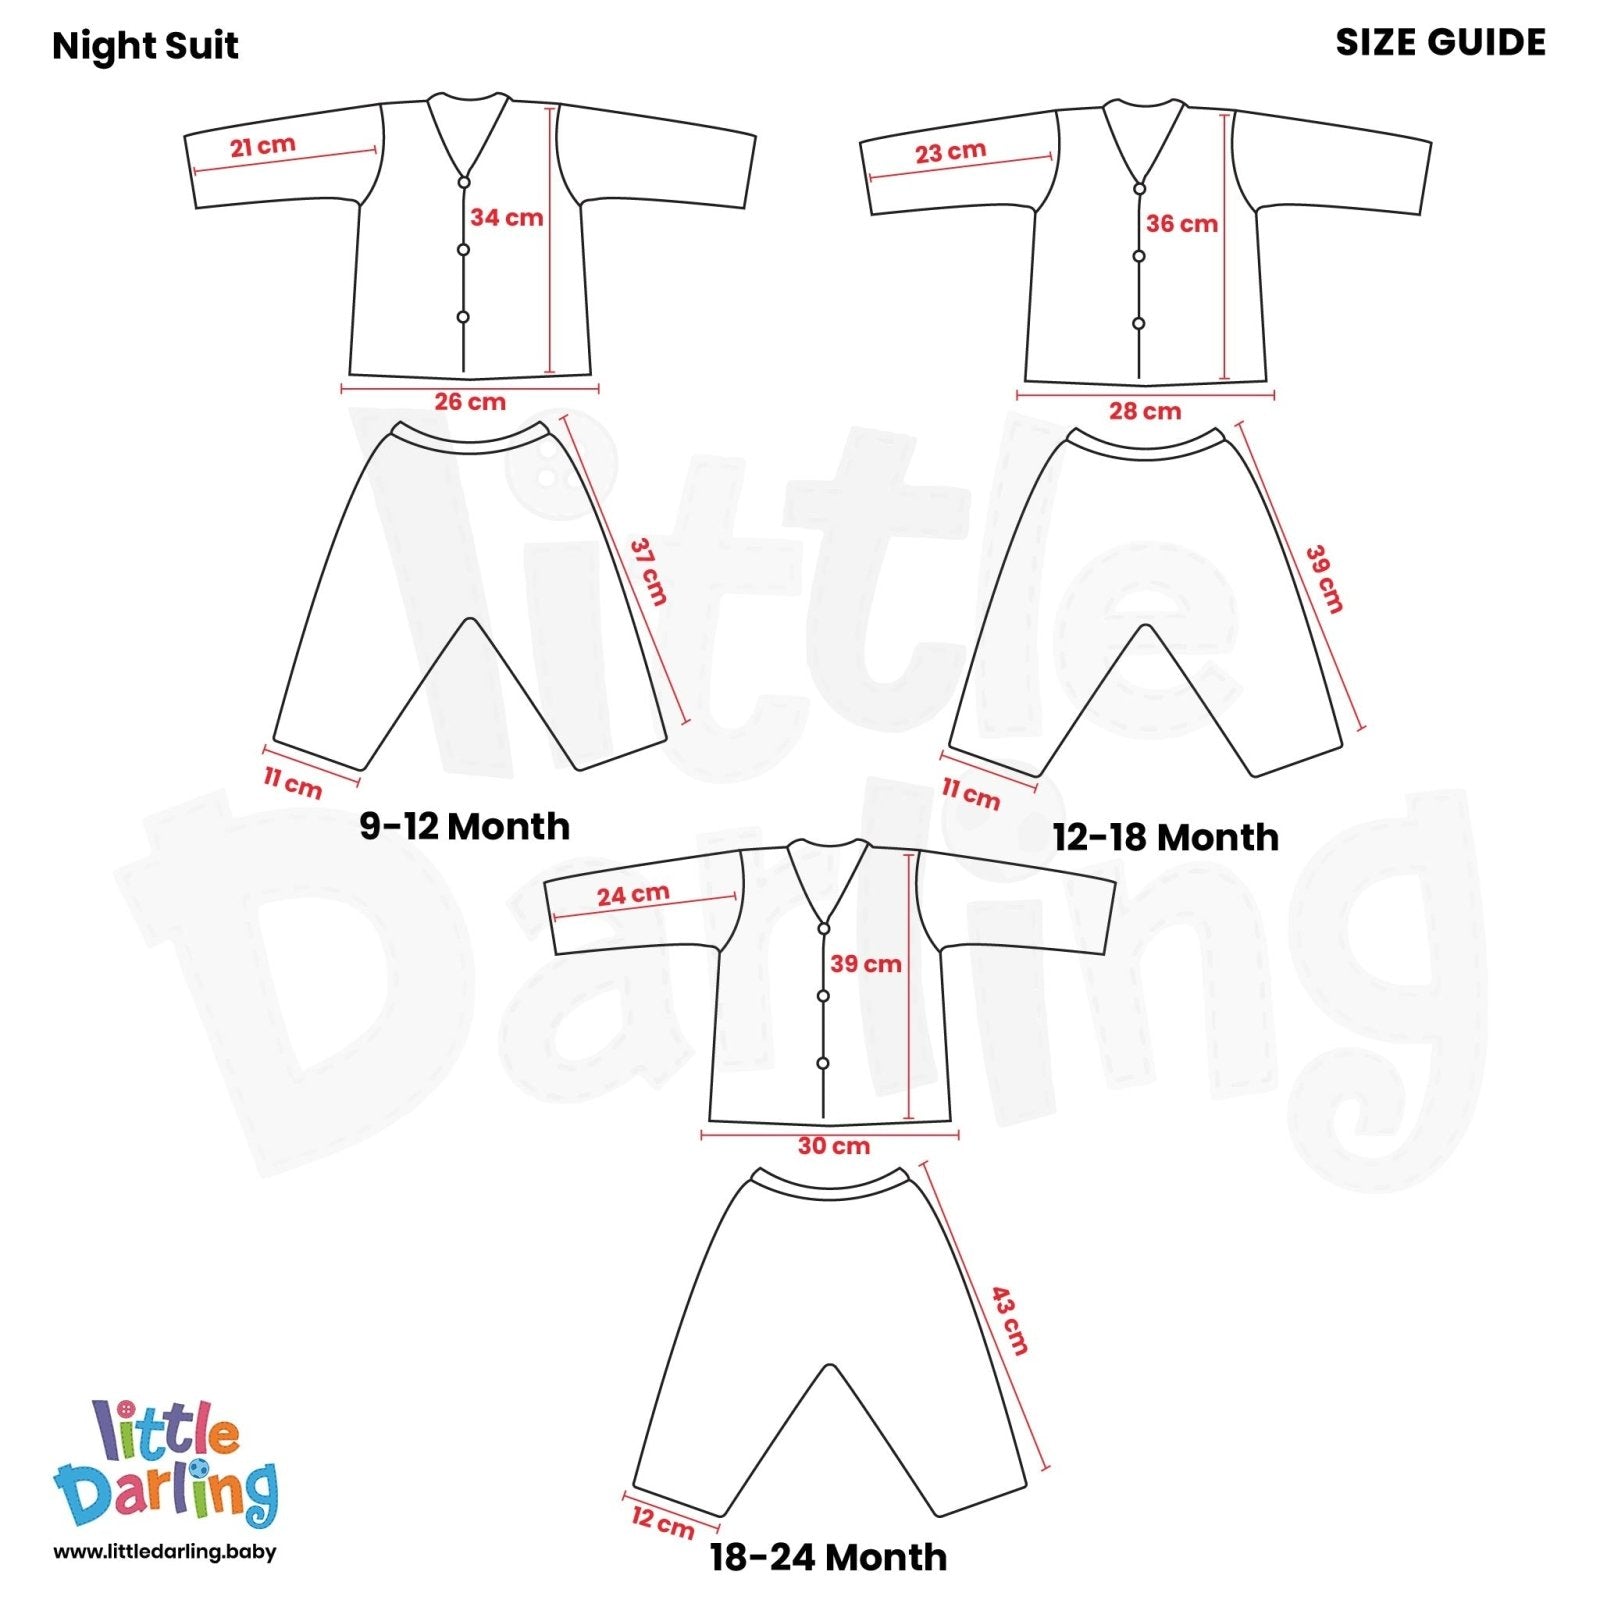 Baby Night Suit Multi Color Stripes by Little Darling